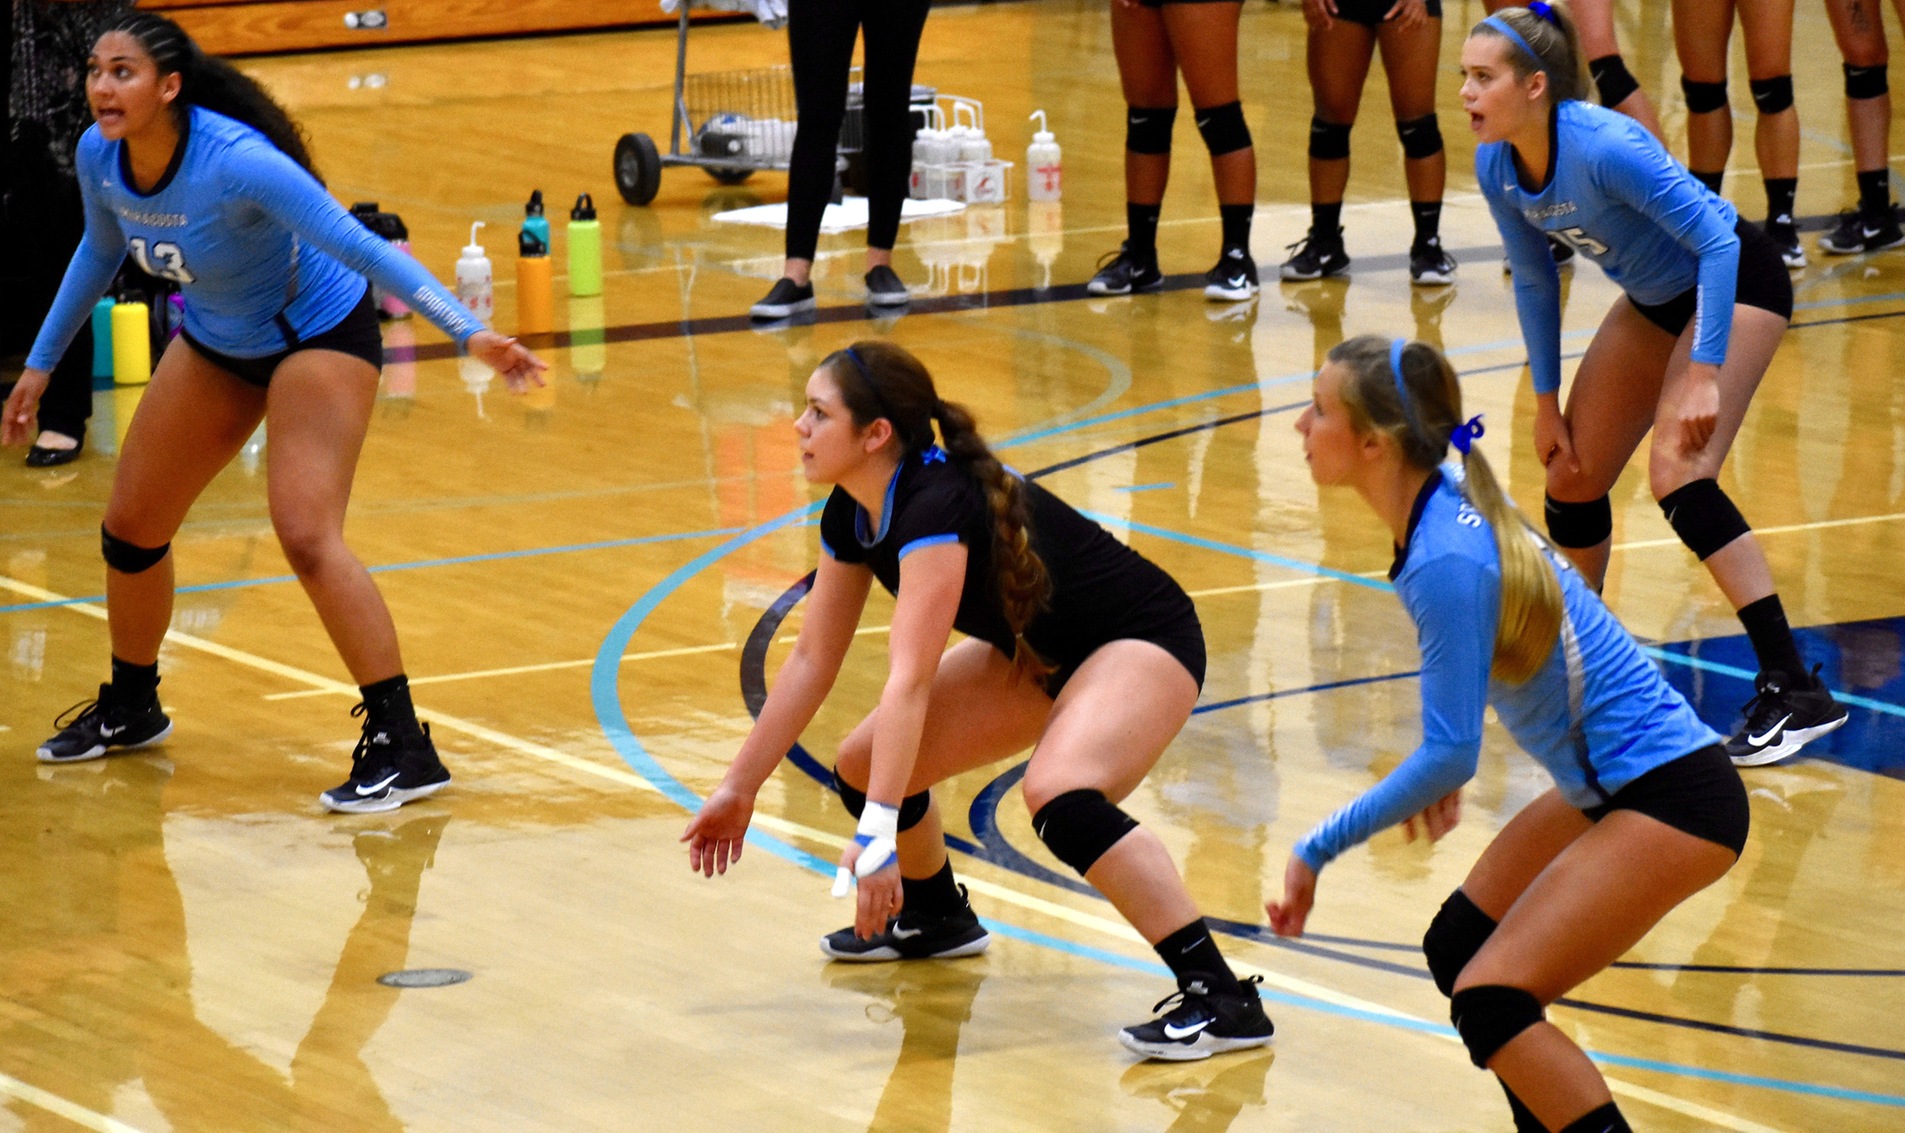 Women's Volleyball team playing defense.